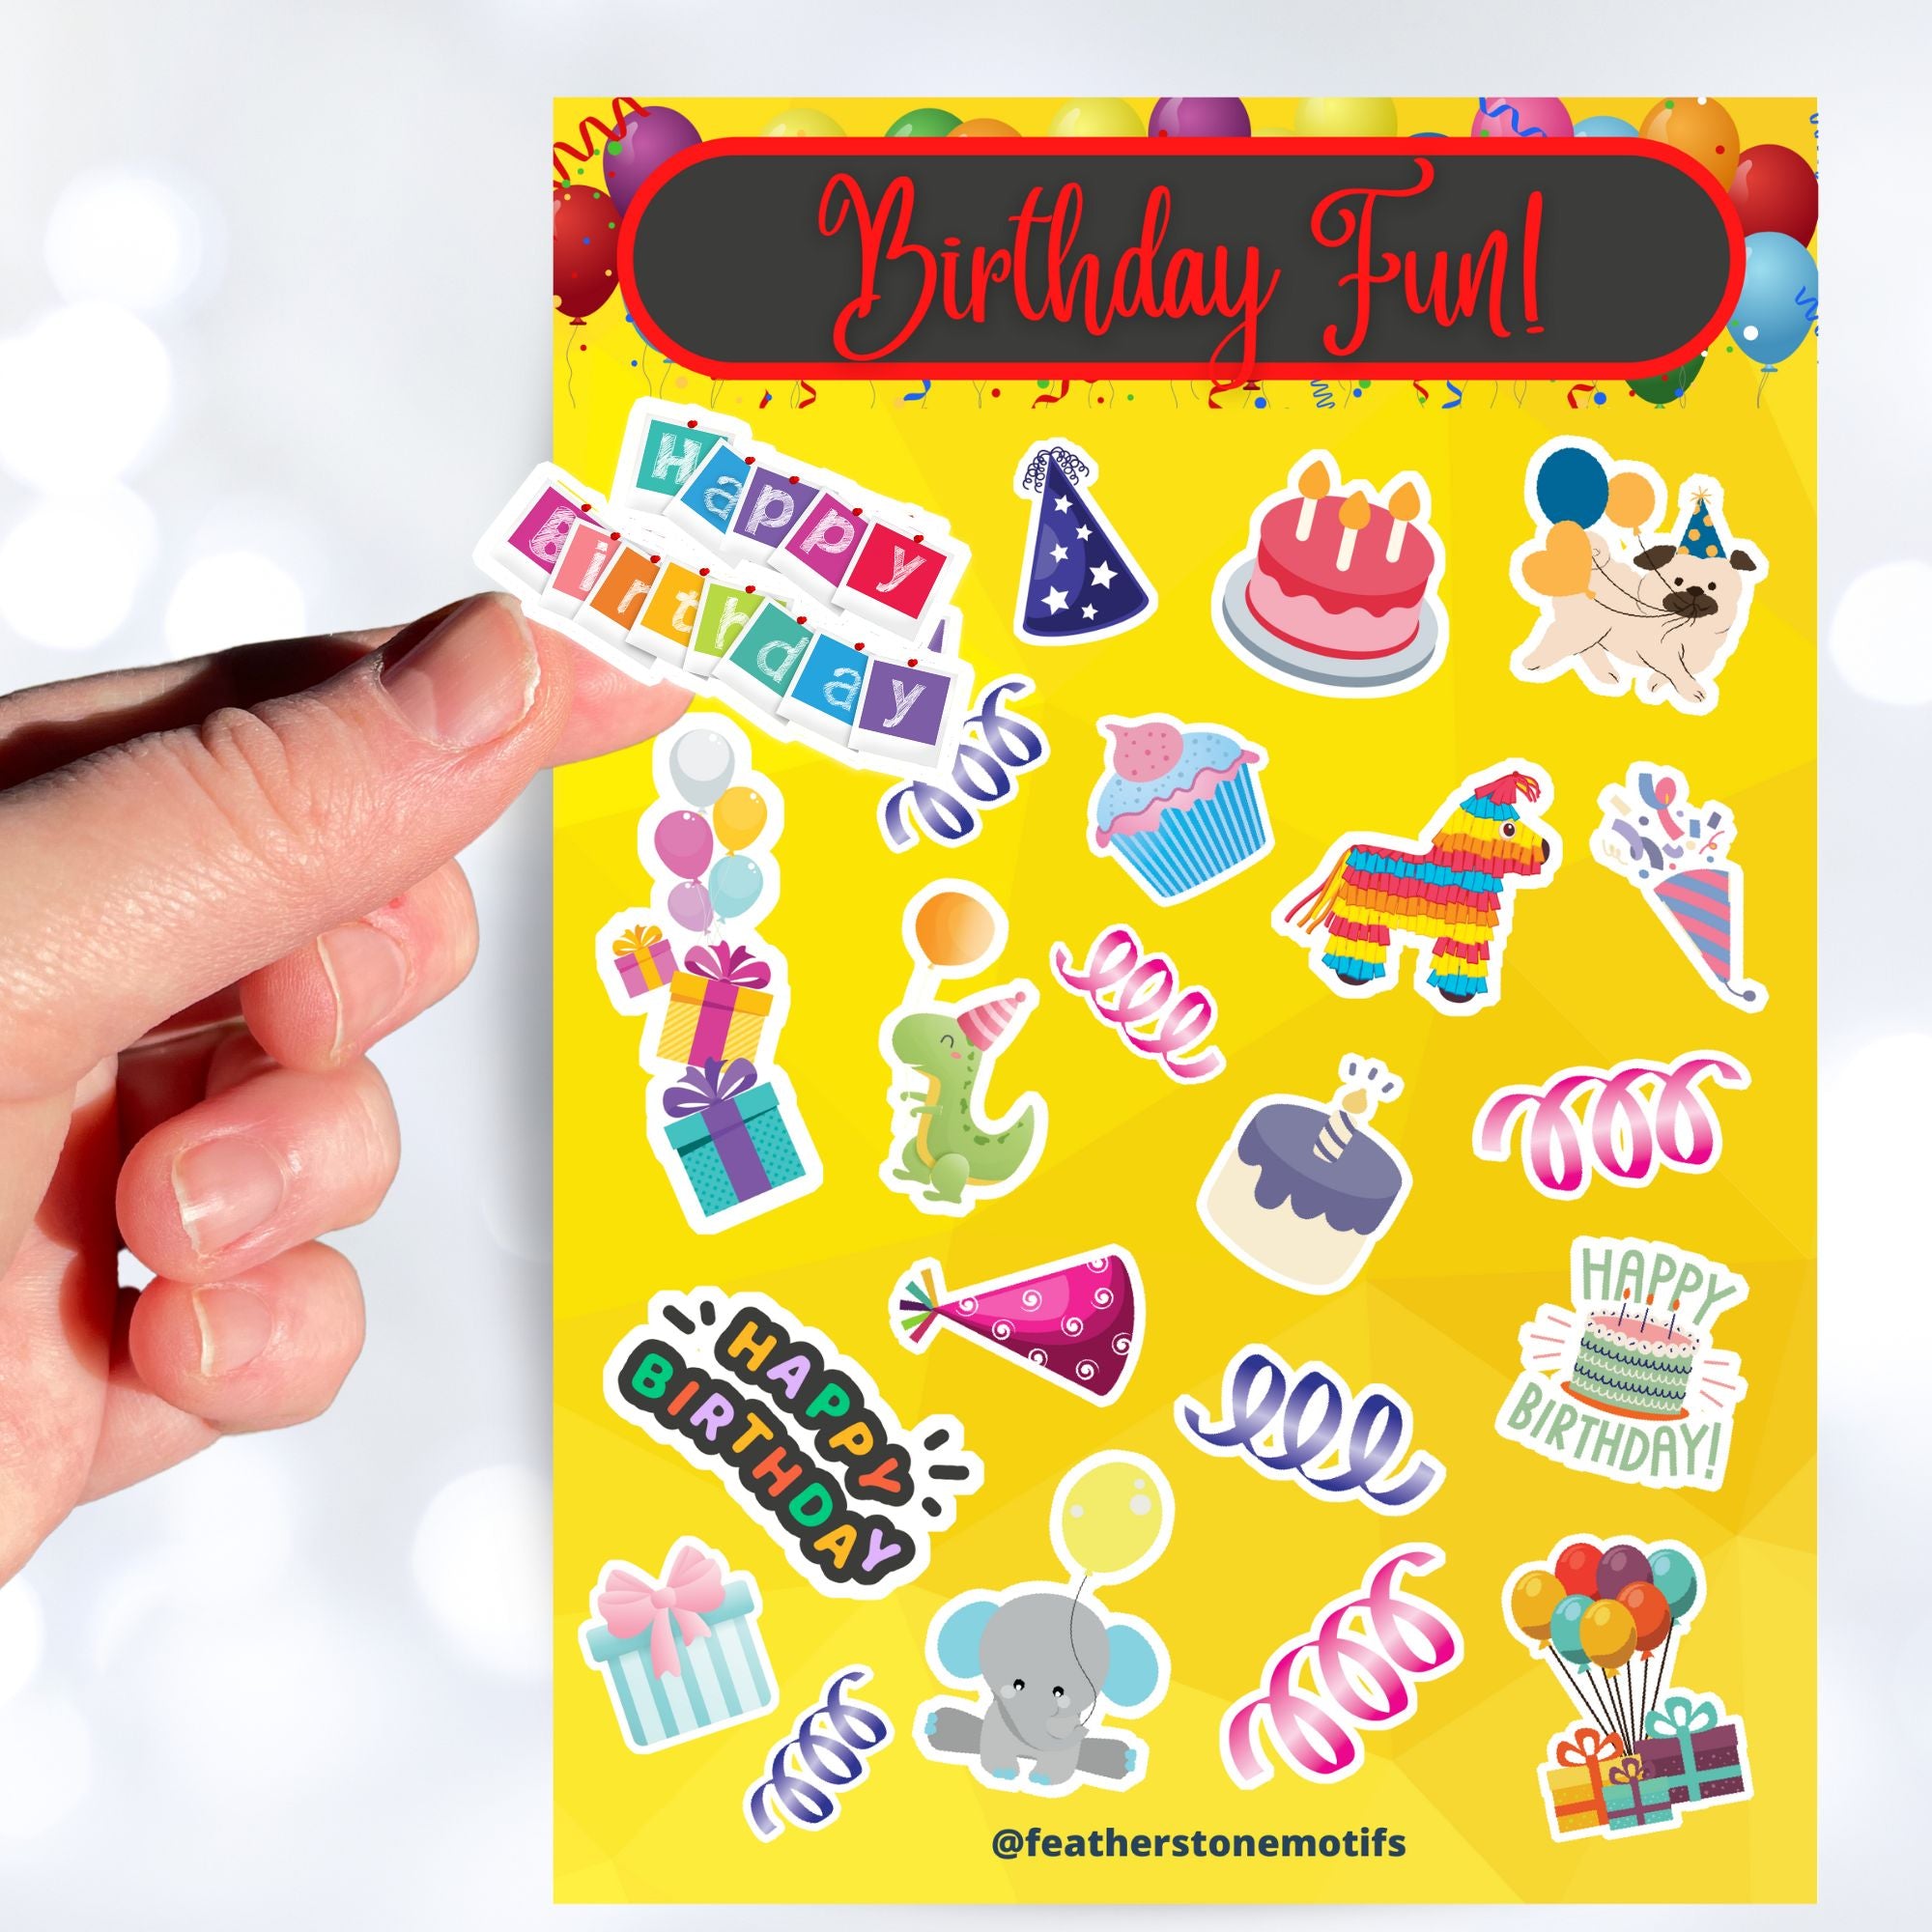 This birthday sticker sheet has a sparkle overlay with stickers showing all your favorite birthday celebration items like: Birthday cakes, presents, balloons, a piñata, birthday hats, and streamers. This image is of a hand holding one of the stickers above the sticker sheet.